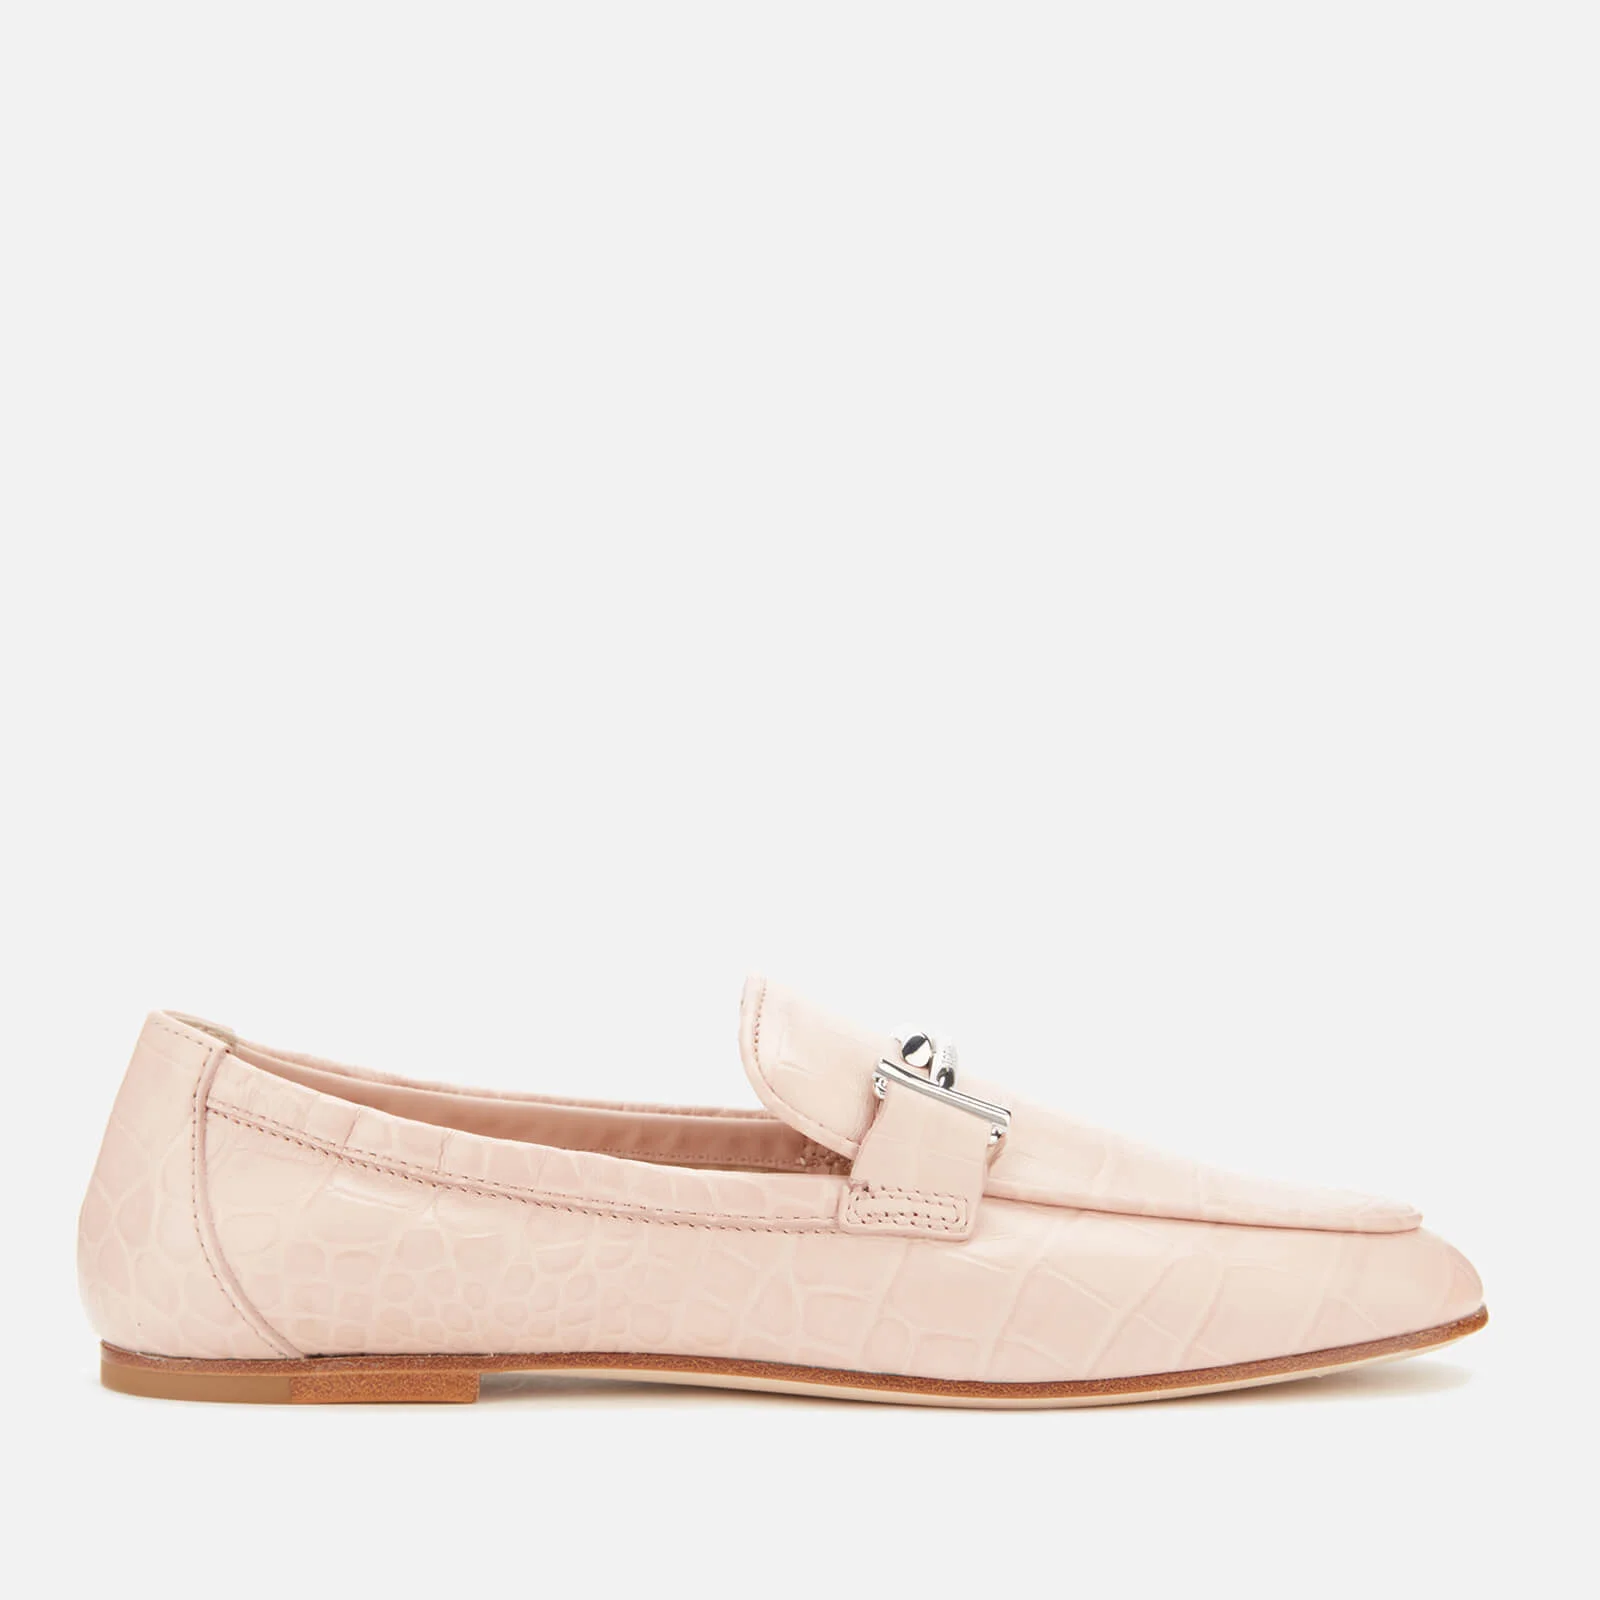 Tod's Women's Leather Double T Moccasin Loafers - Pink Image 1